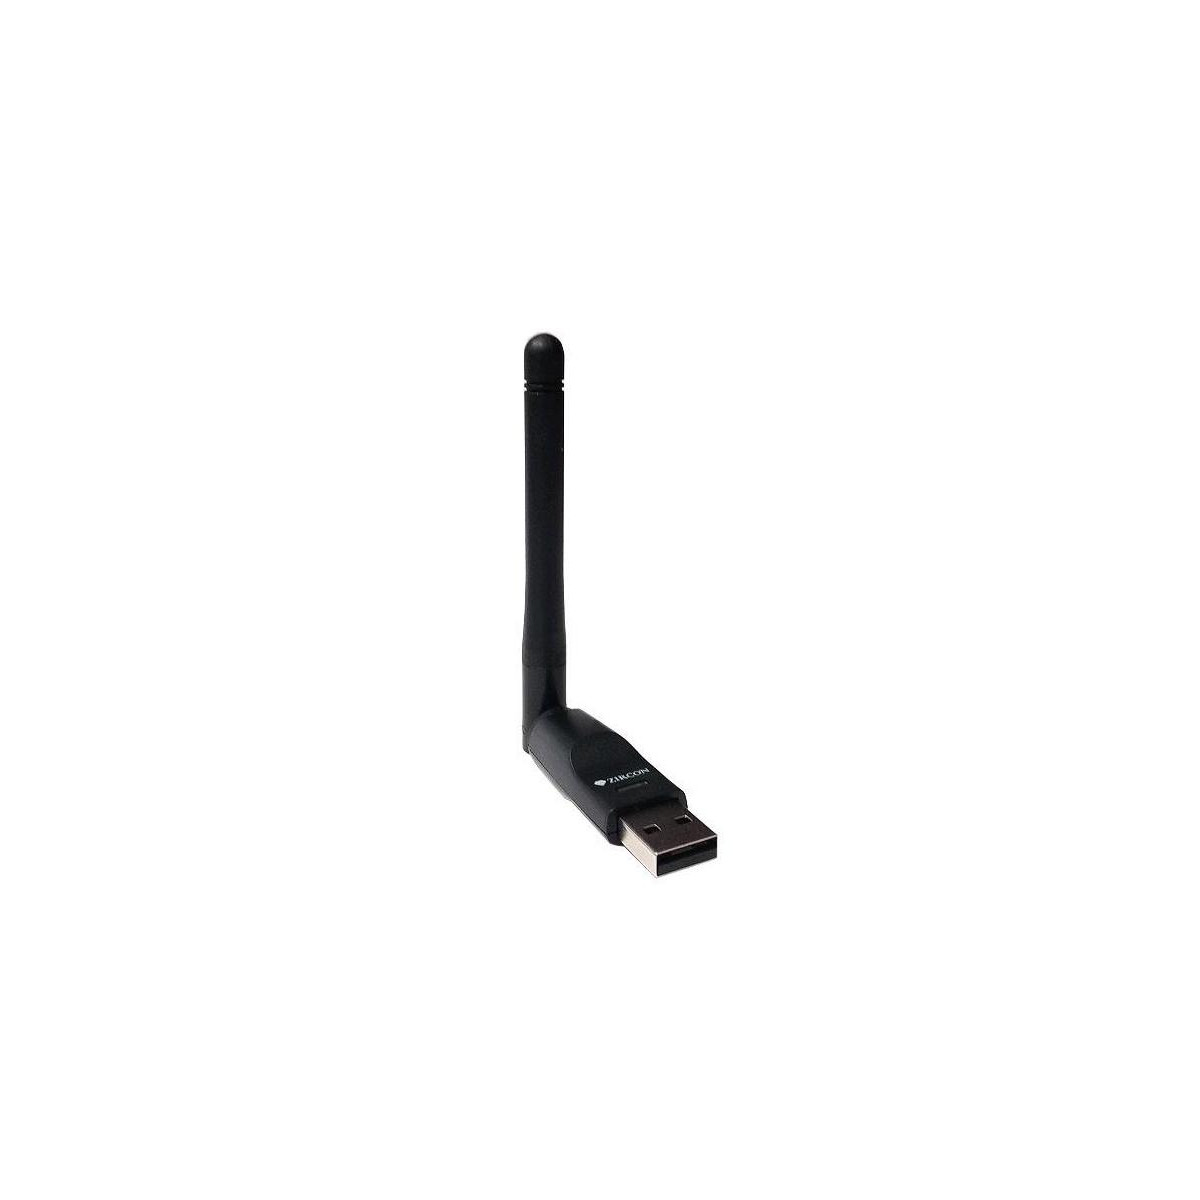 More about Wi-Fi USB Adaptér Dongle 2,4GHz Zircon WA 150 RT53